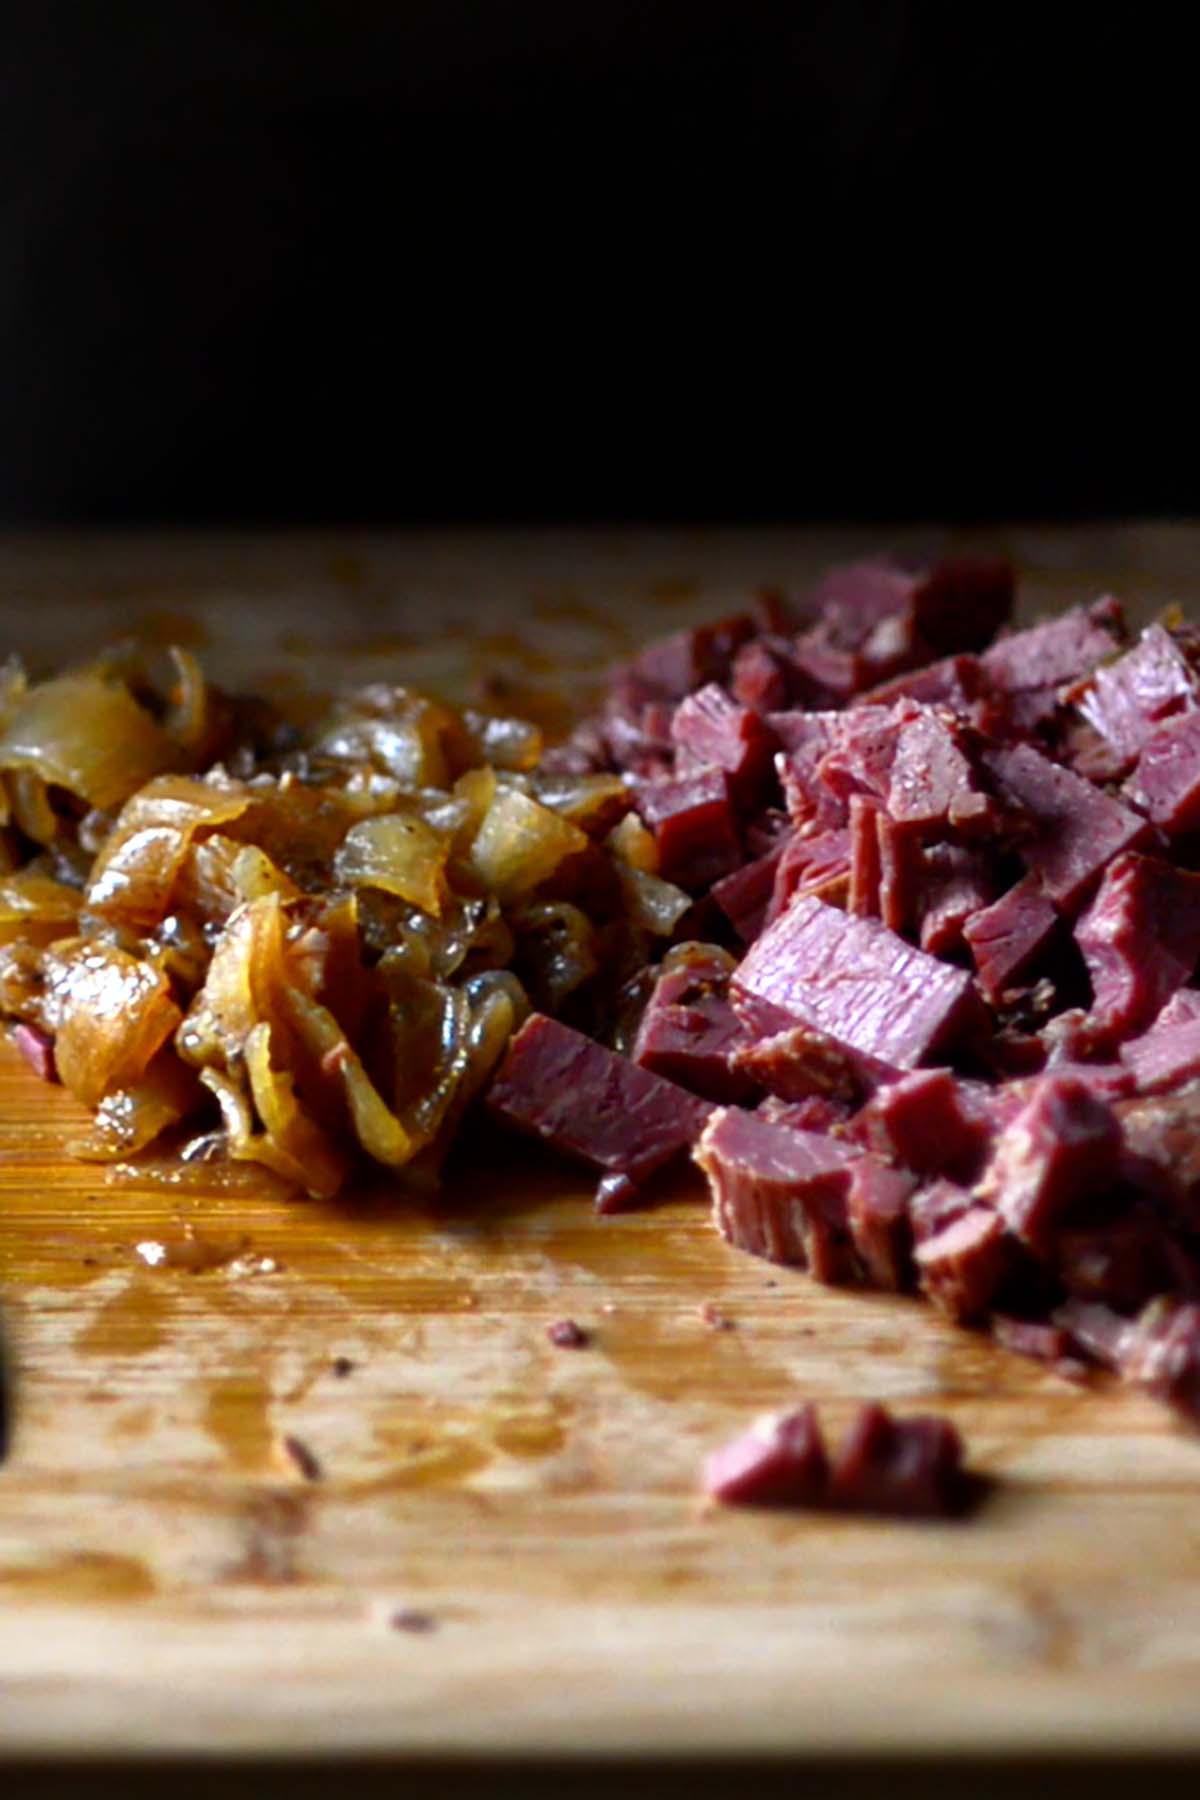 Cooked corned beef brisket and onions chopped on a wooden cutting board.